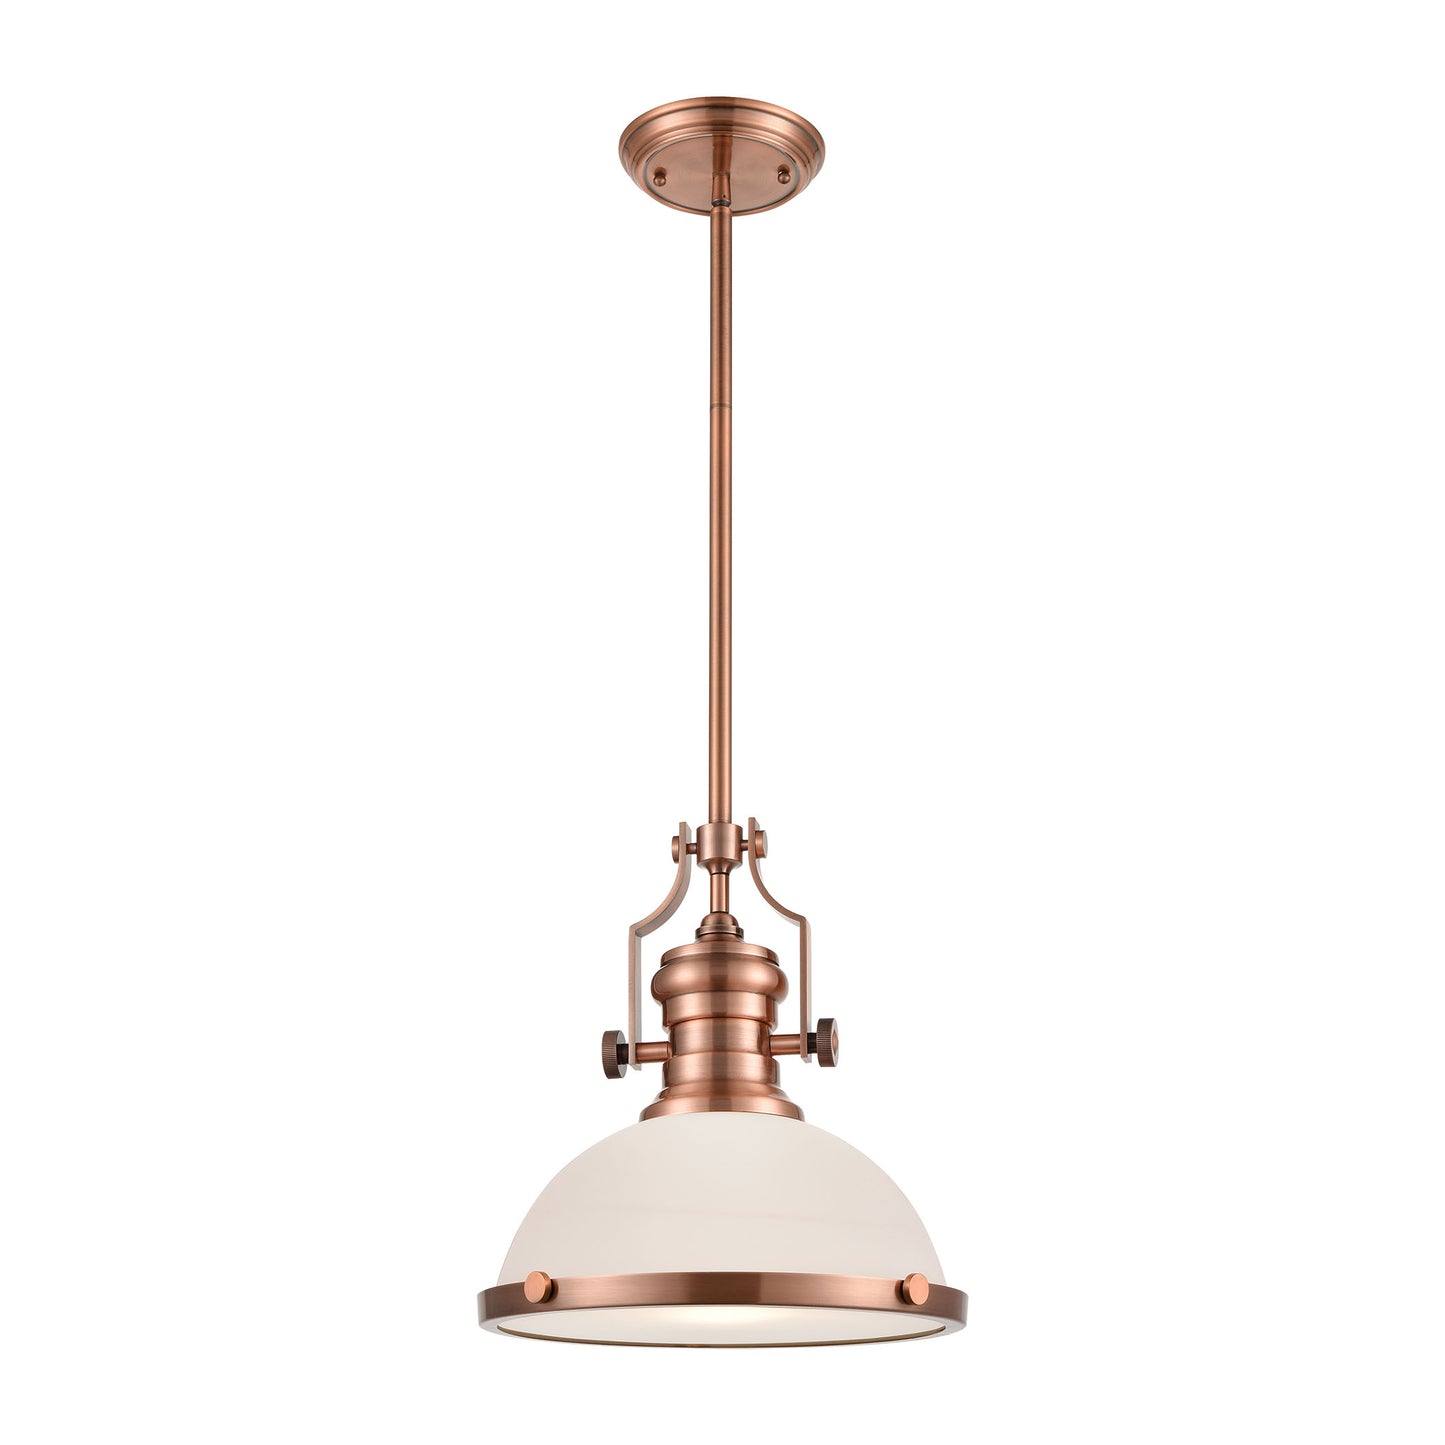 Chadwick 1-Light Pendant in Antique Copper with White Glass